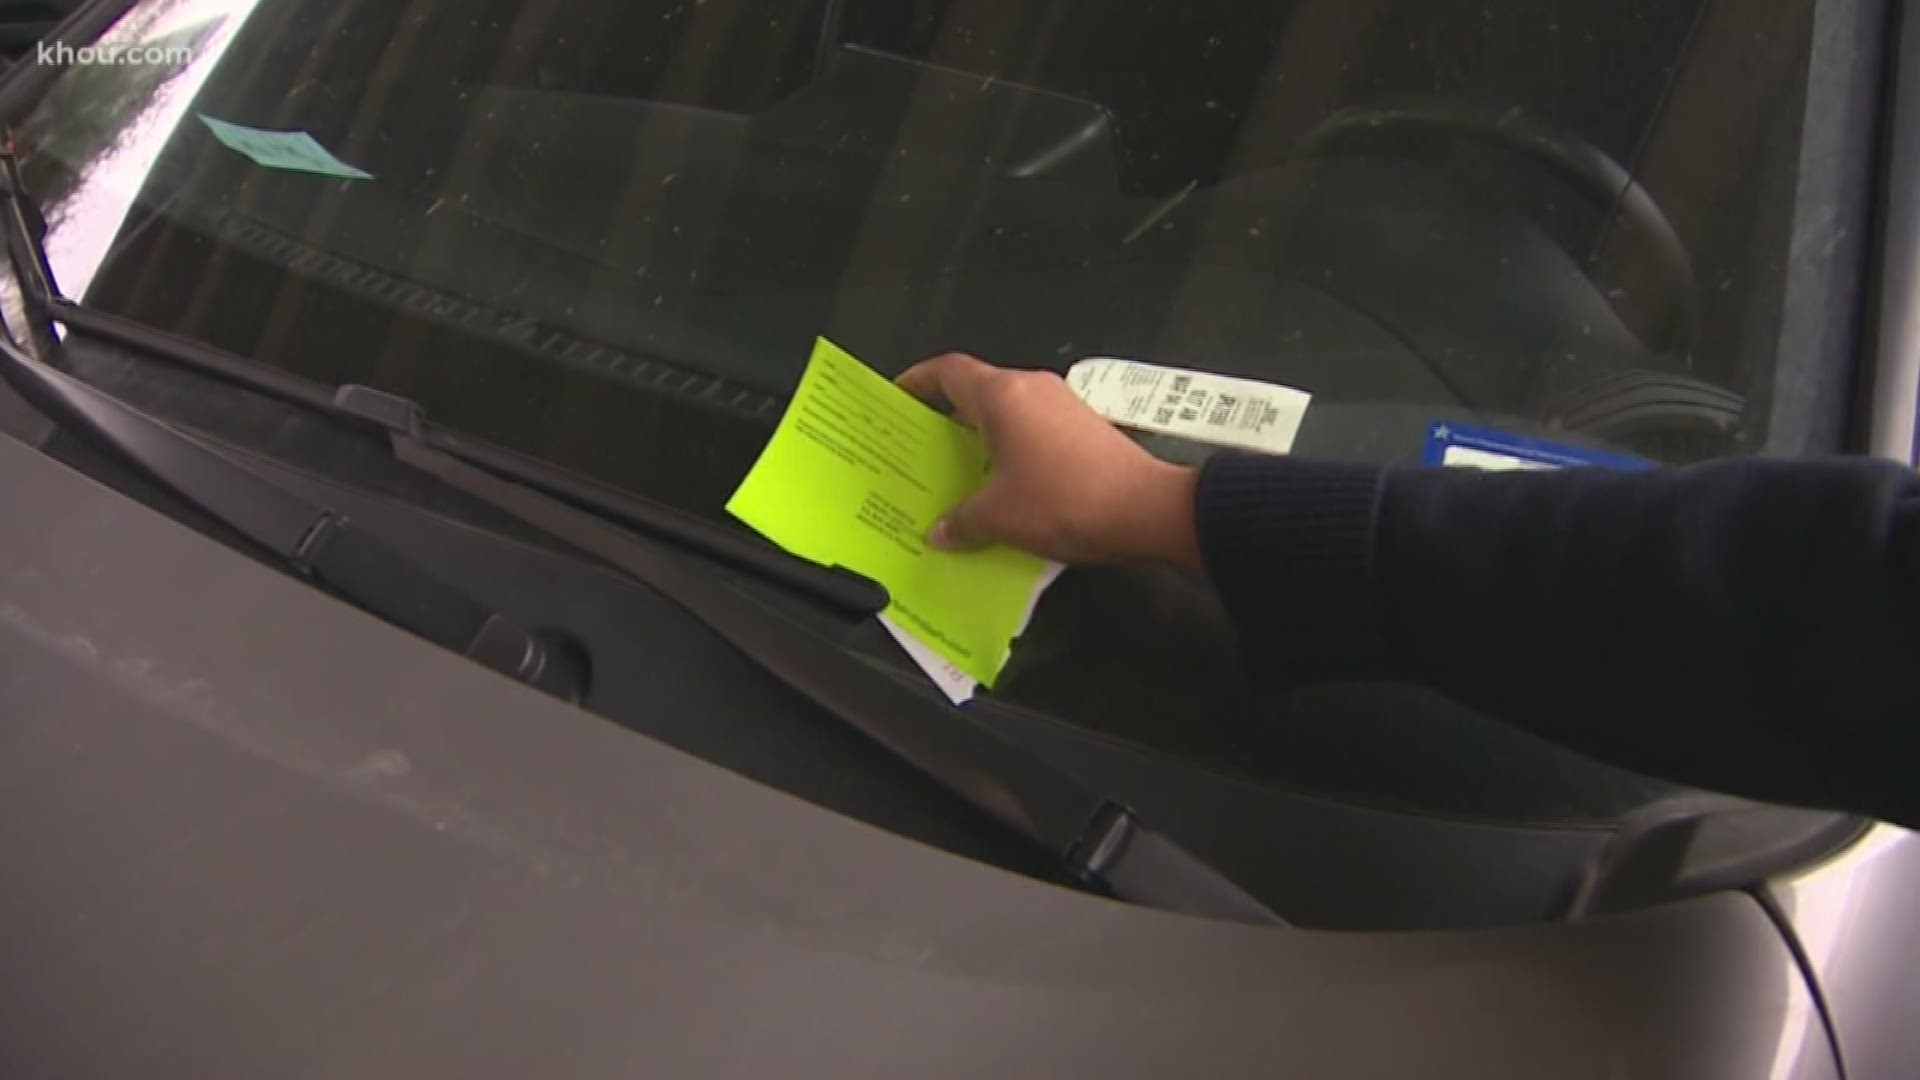 A KHOU 11 Investigates analysis showed the City of Houston handed out more than 578,000 parking tickets between 2016-2018 and collected nearly $30 million in fines.